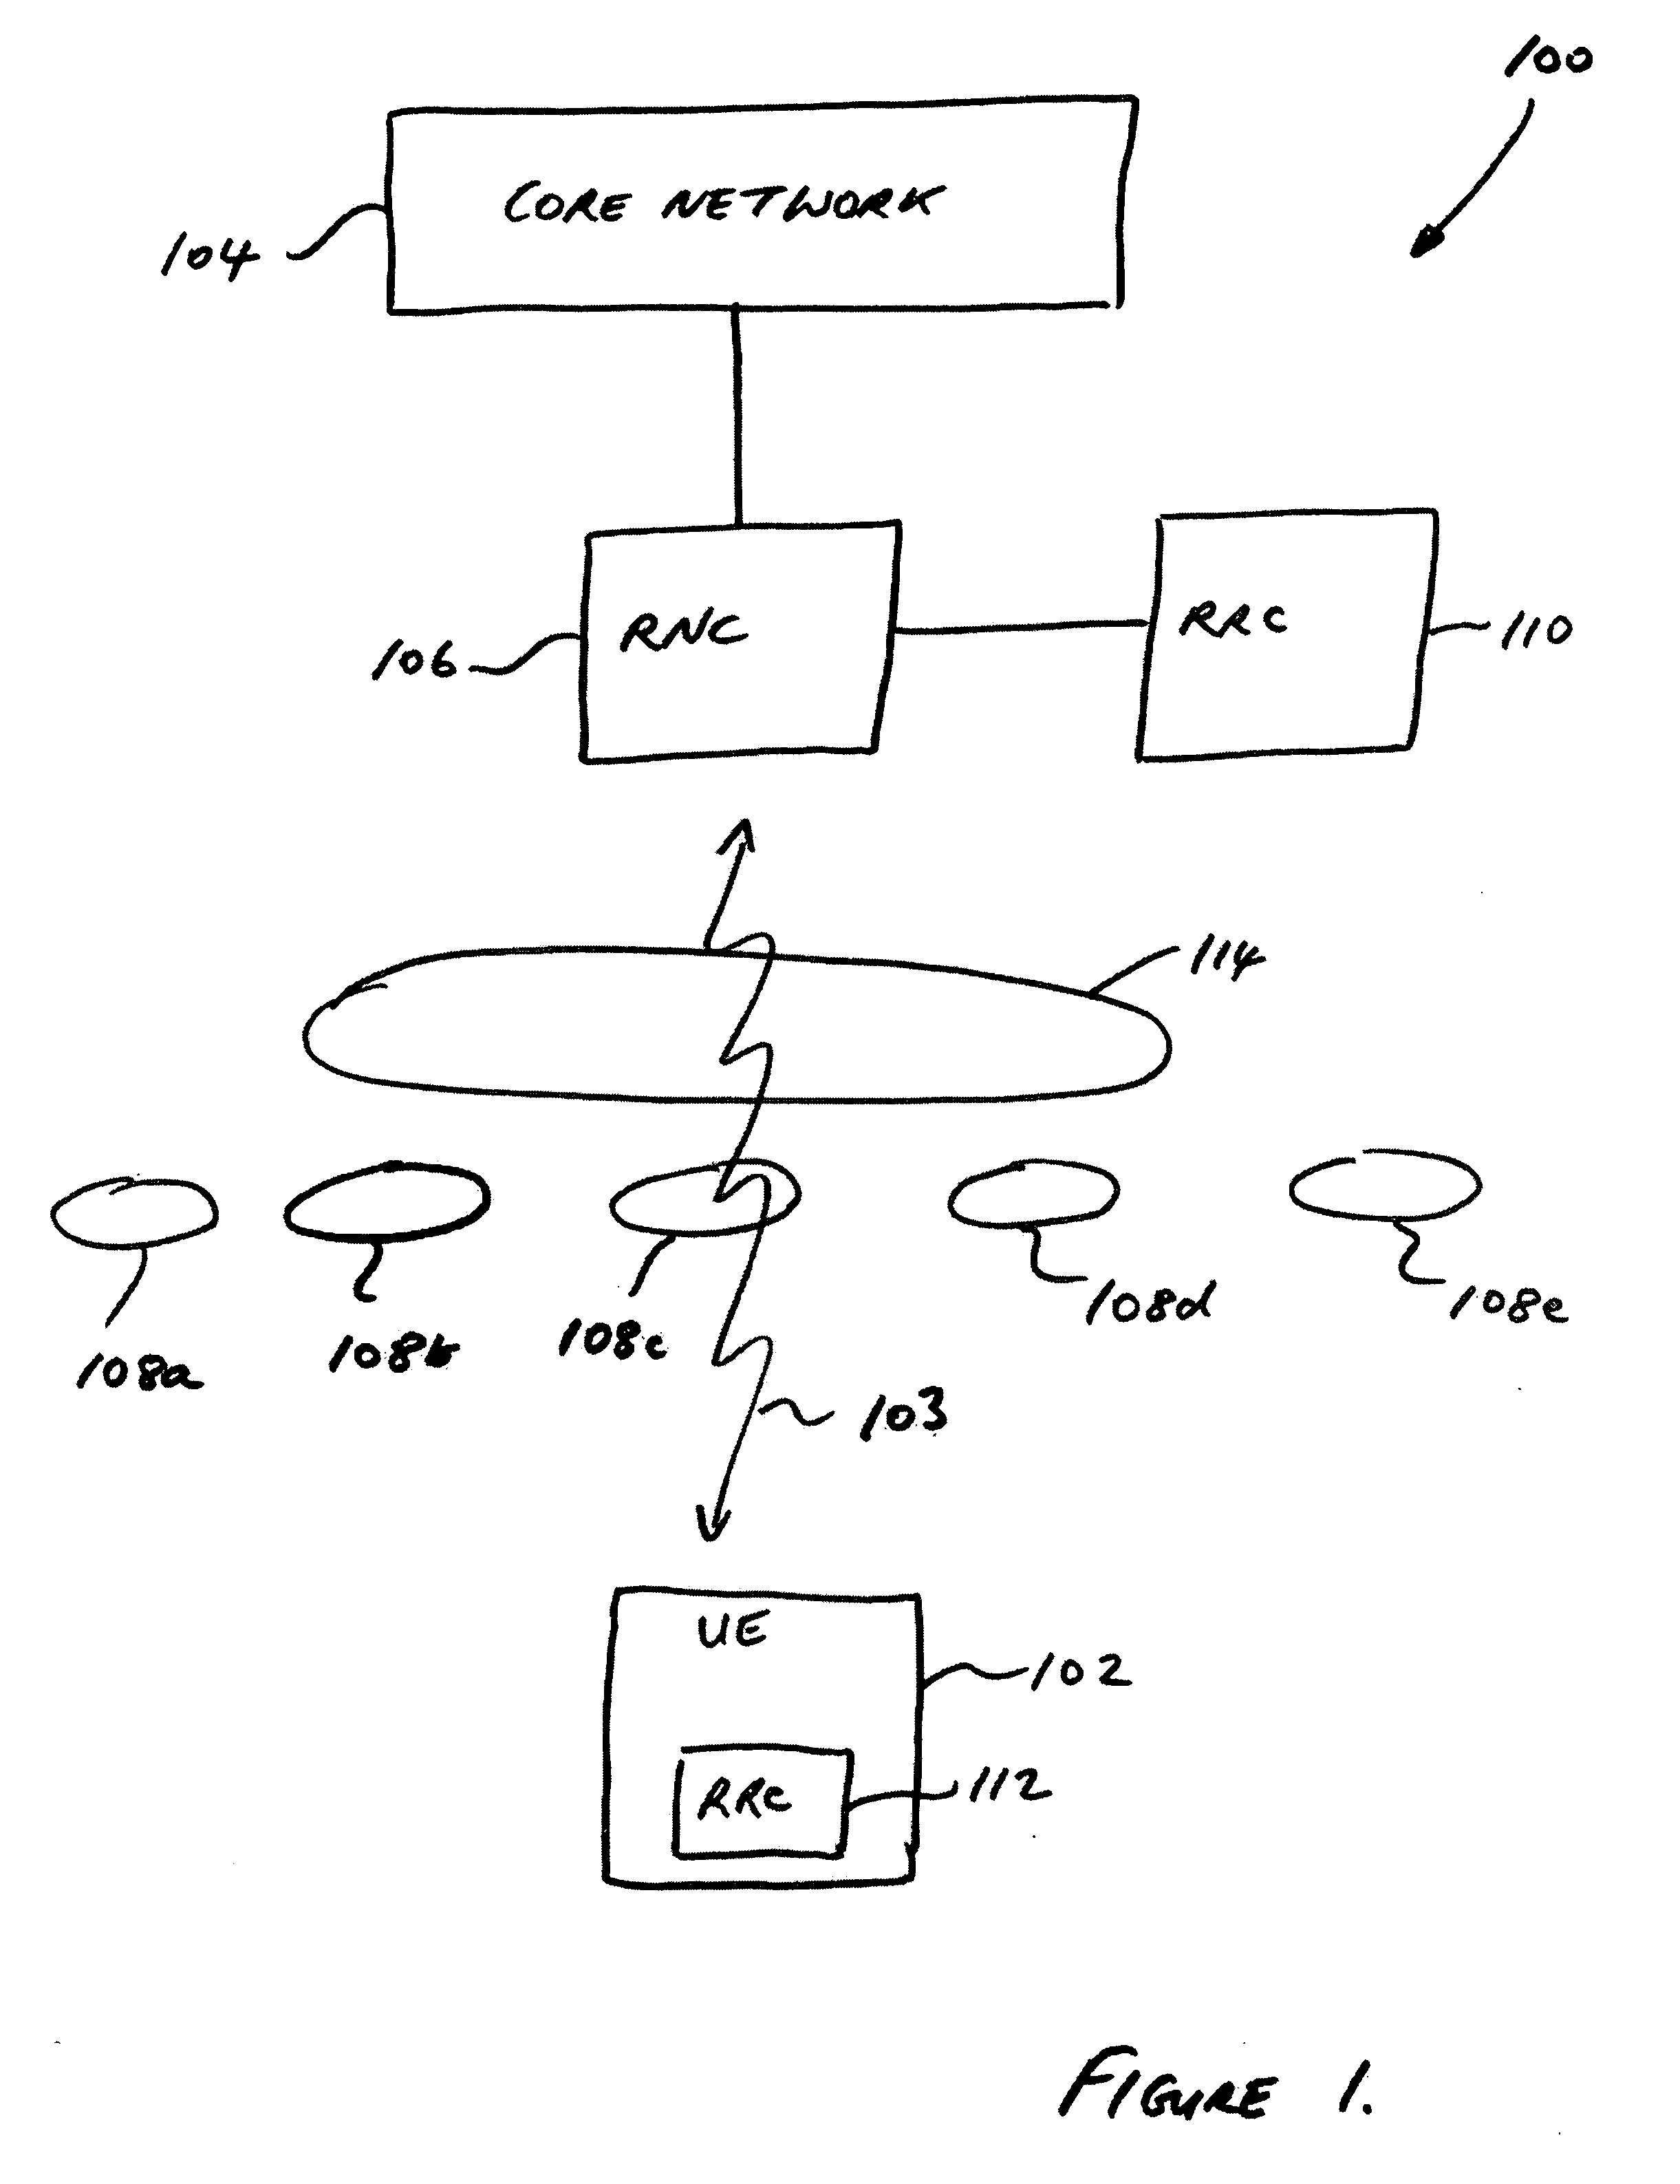 Method for processing traffic data in a wireless communications system